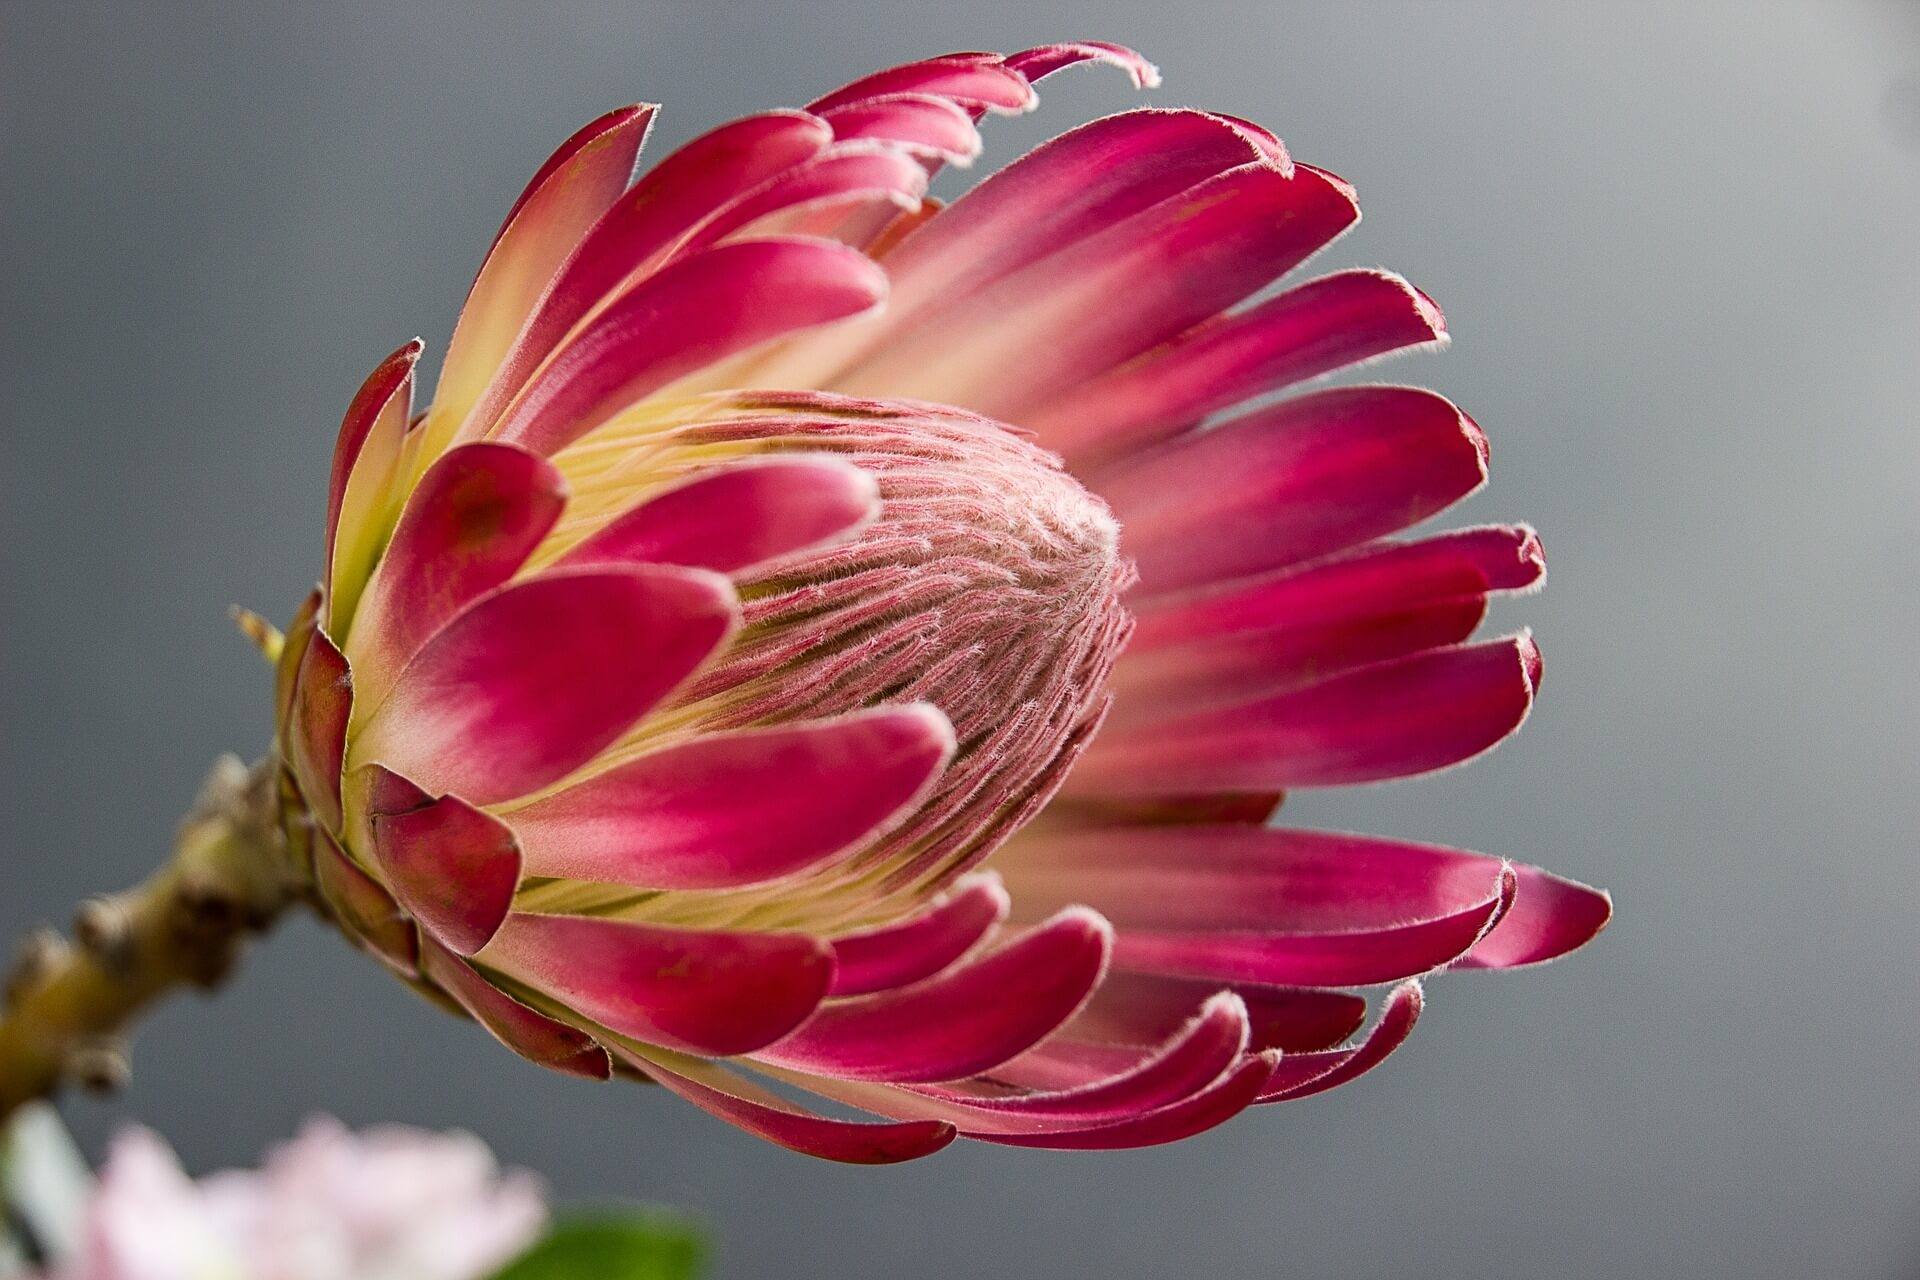 50+ Beautiful Flower Images Wallpapers for Your Desktop | CGfrog